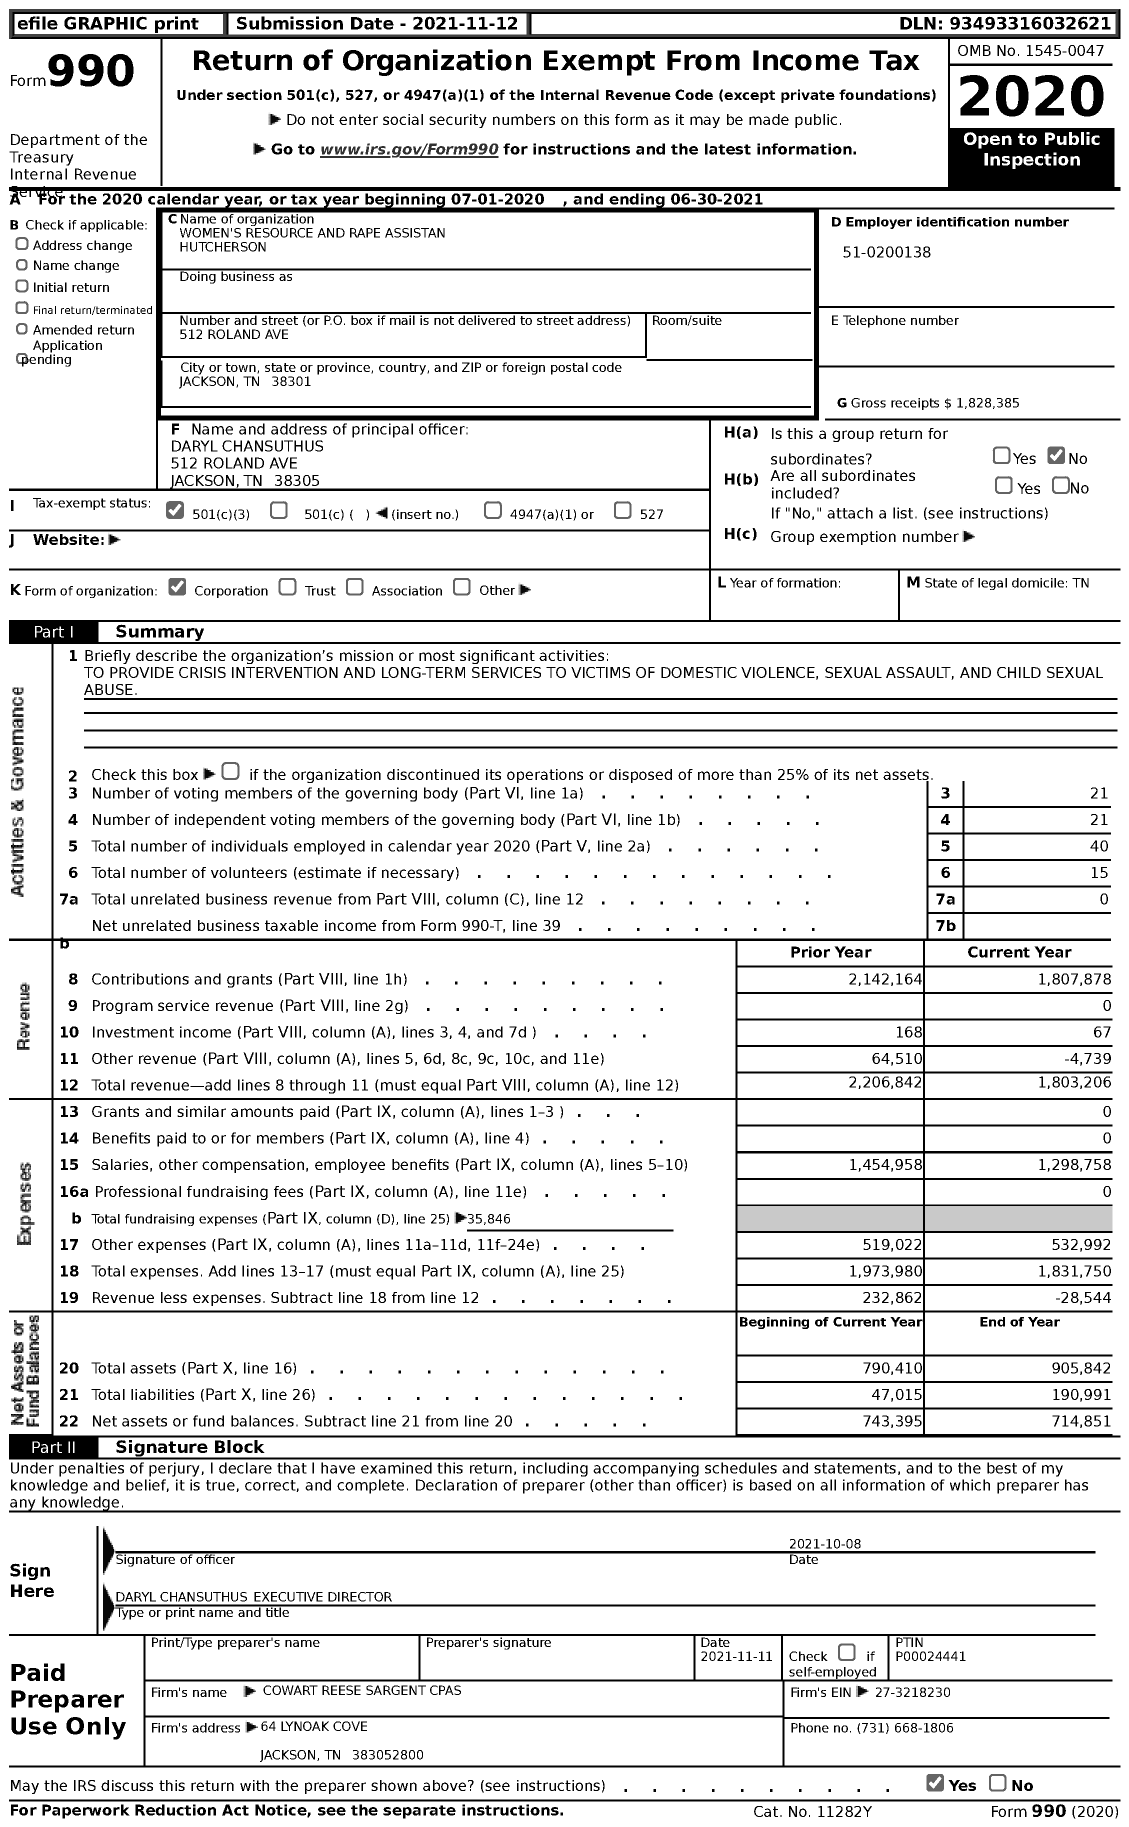 Image of first page of 2020 Form 990 for Women's Resource and Rape Assistance Hutcherson